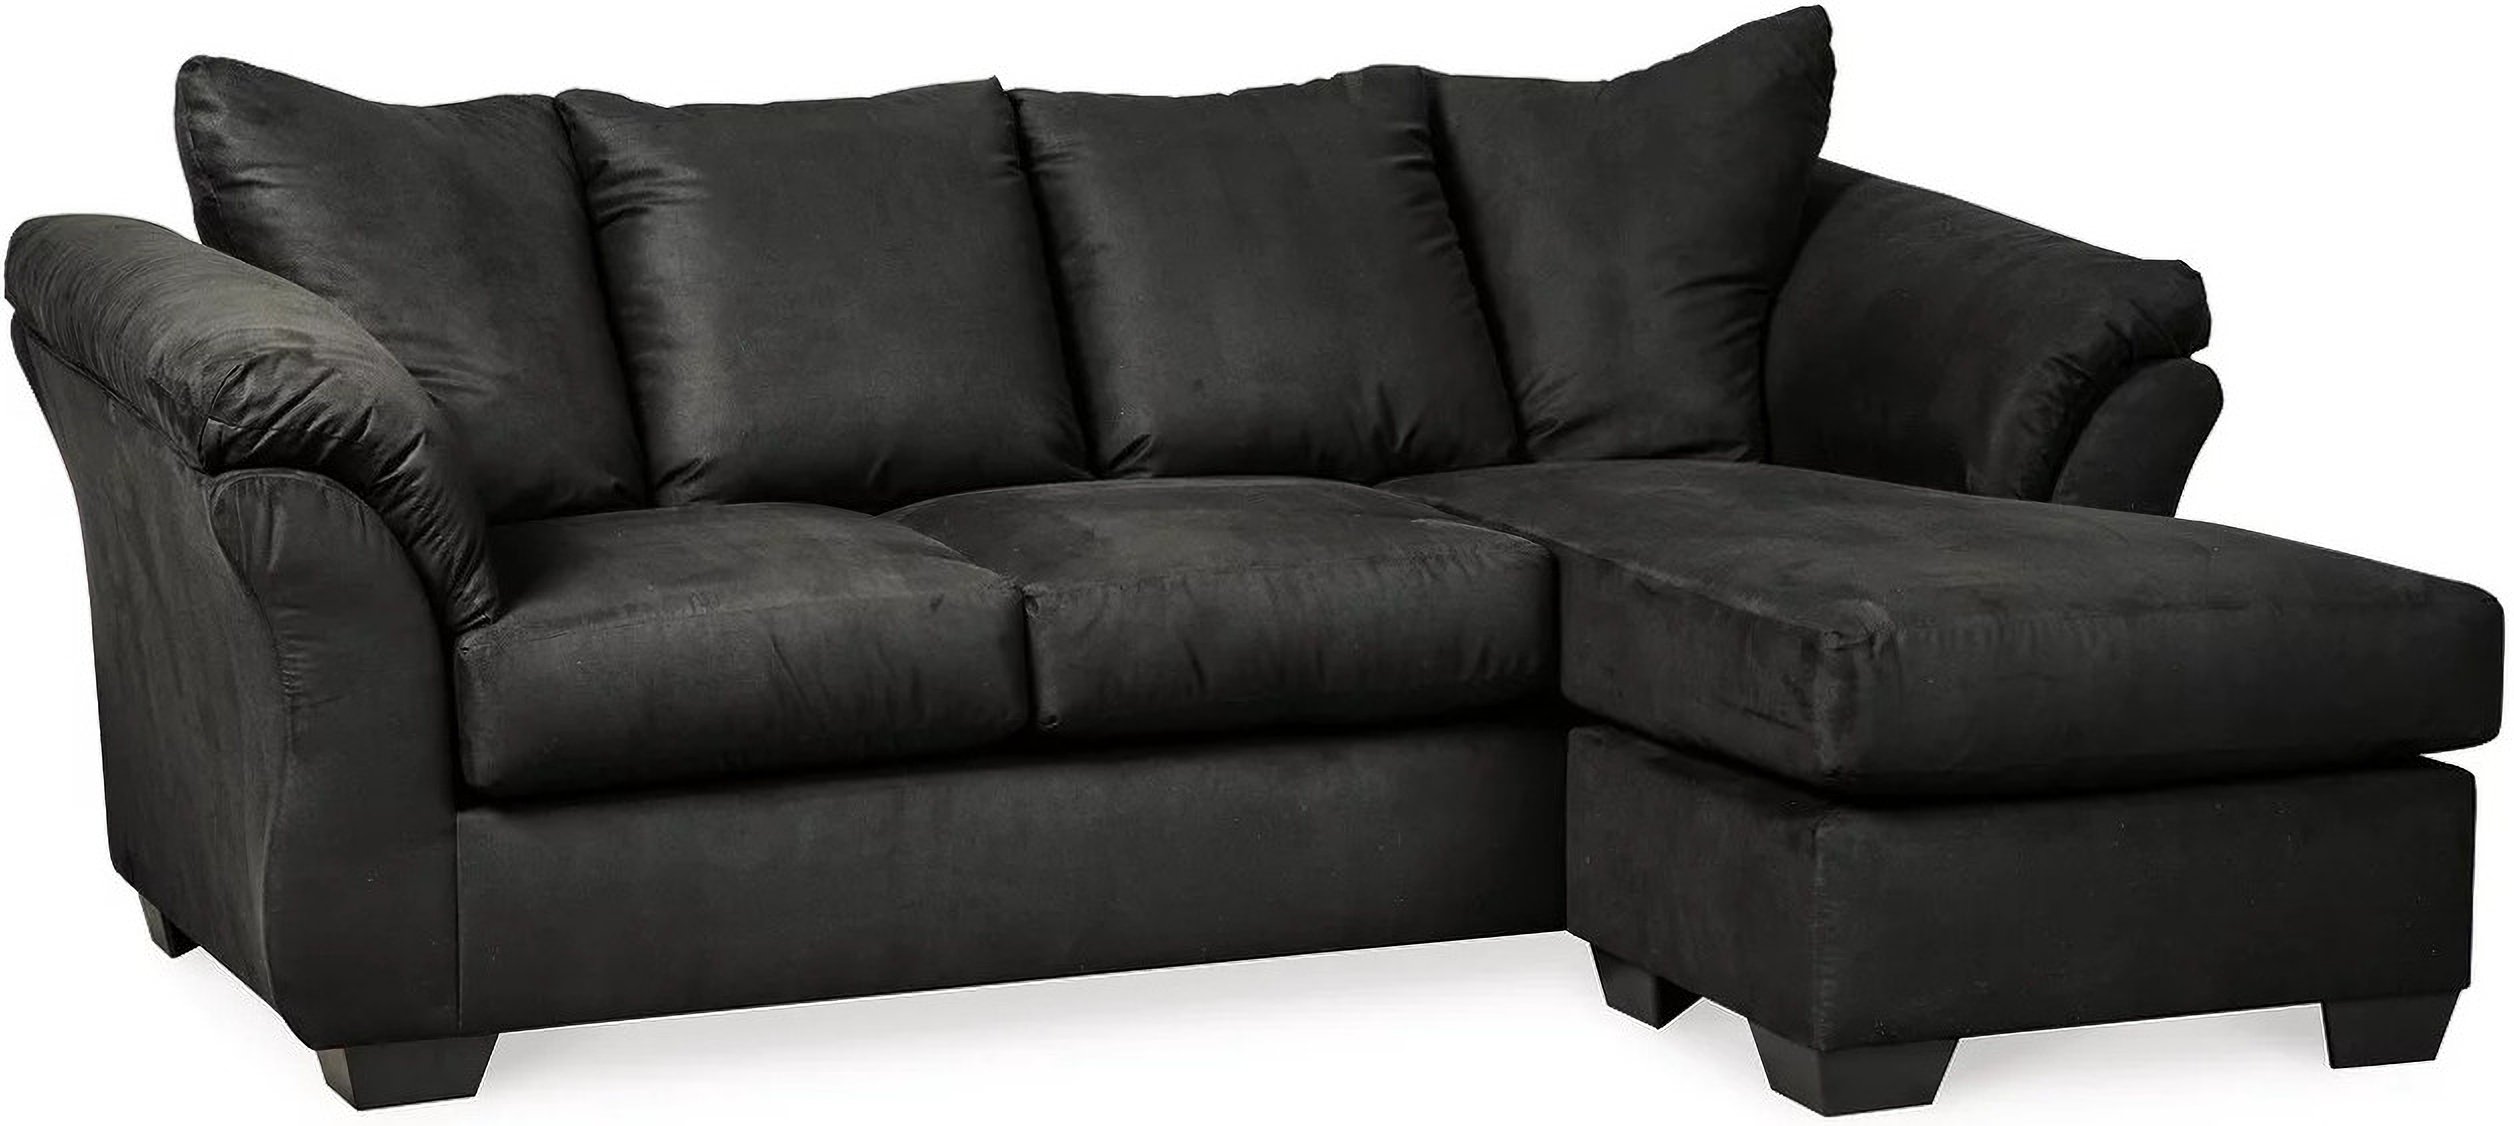 Darcy Sofa Chaise In Black By Ashley